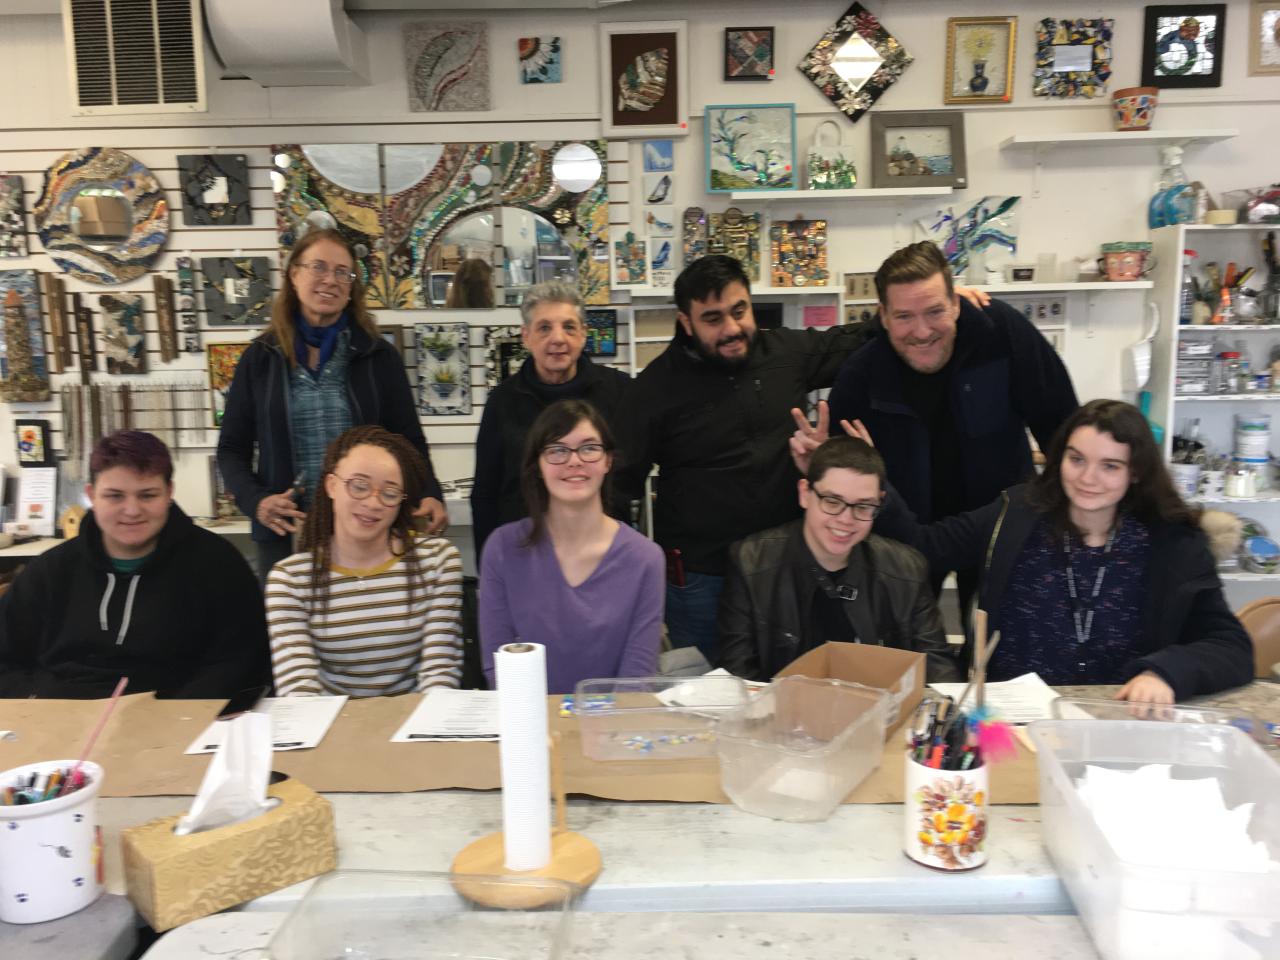 group of students finishing up their mosaic projects at an artist's studio.